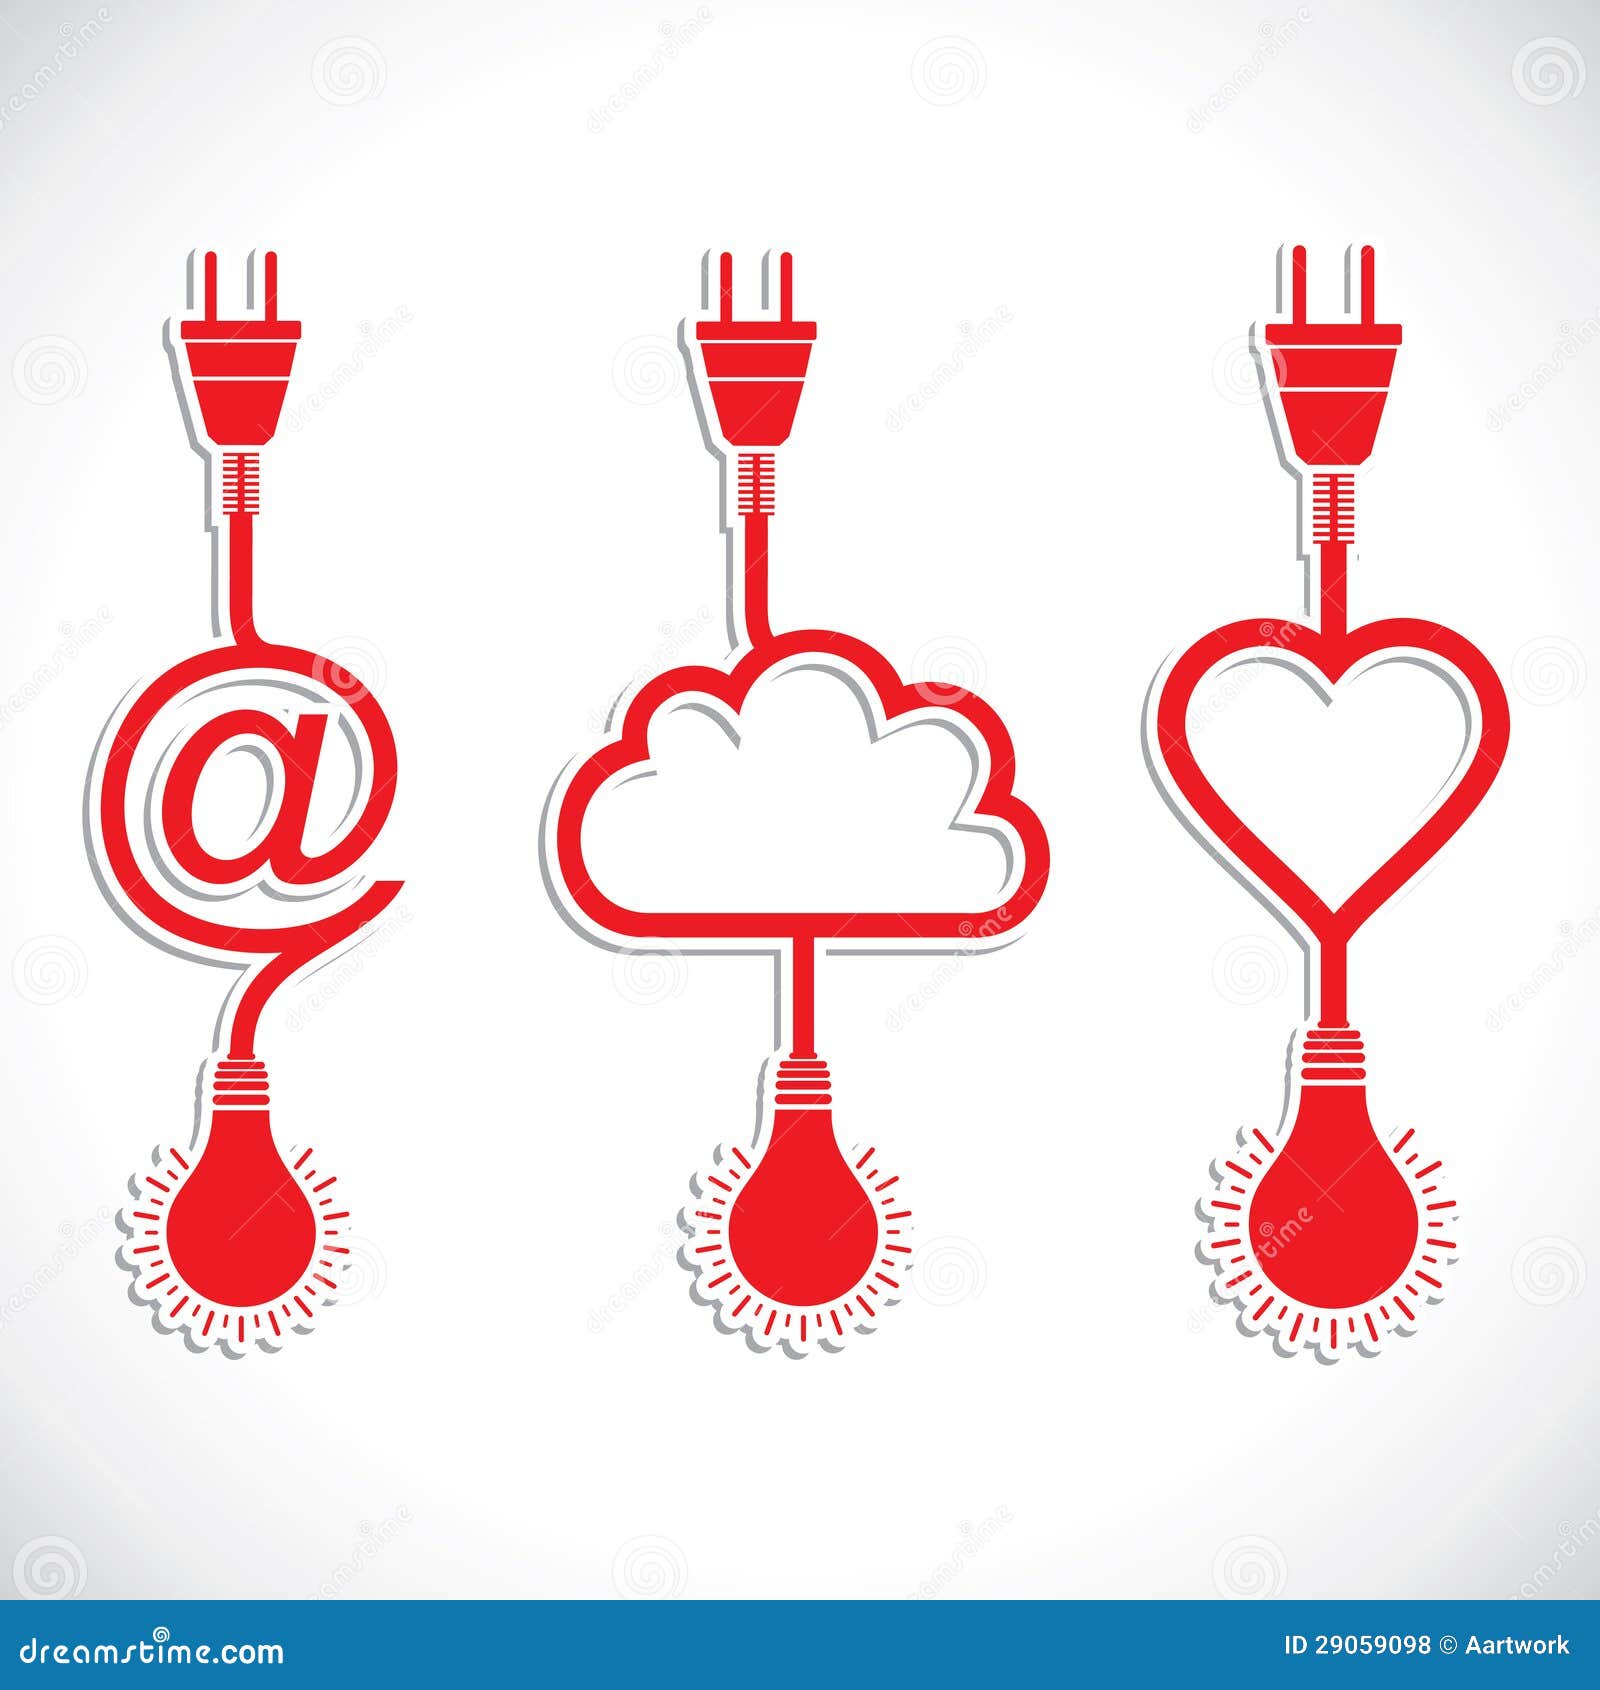 creative icon  of heart and cloud with plug